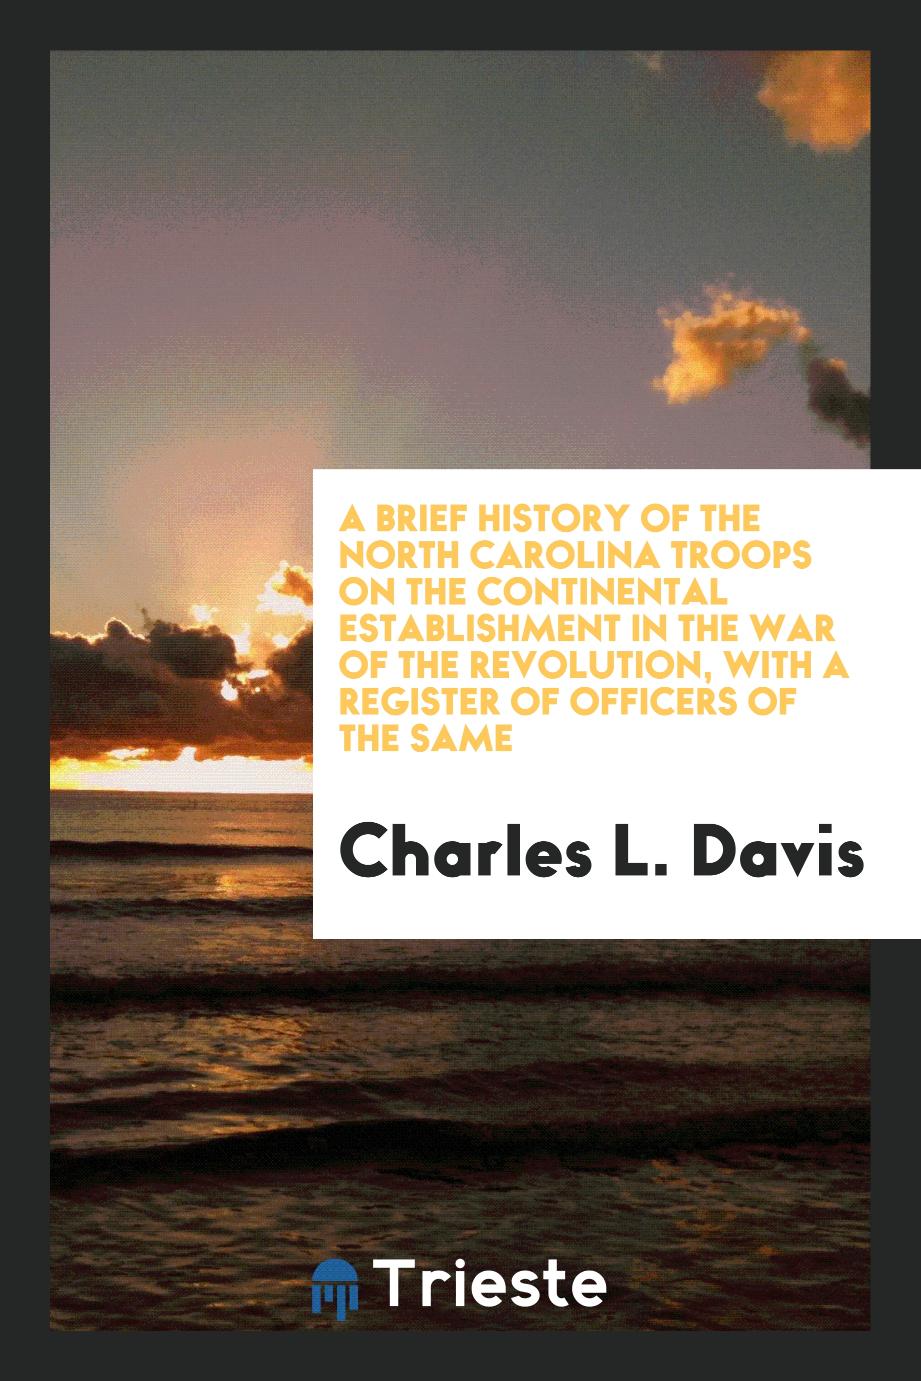 A Brief History of the North Carolina Troops on the Continental Establishment in the War of the Revolution, with a Register of Officers of the Same